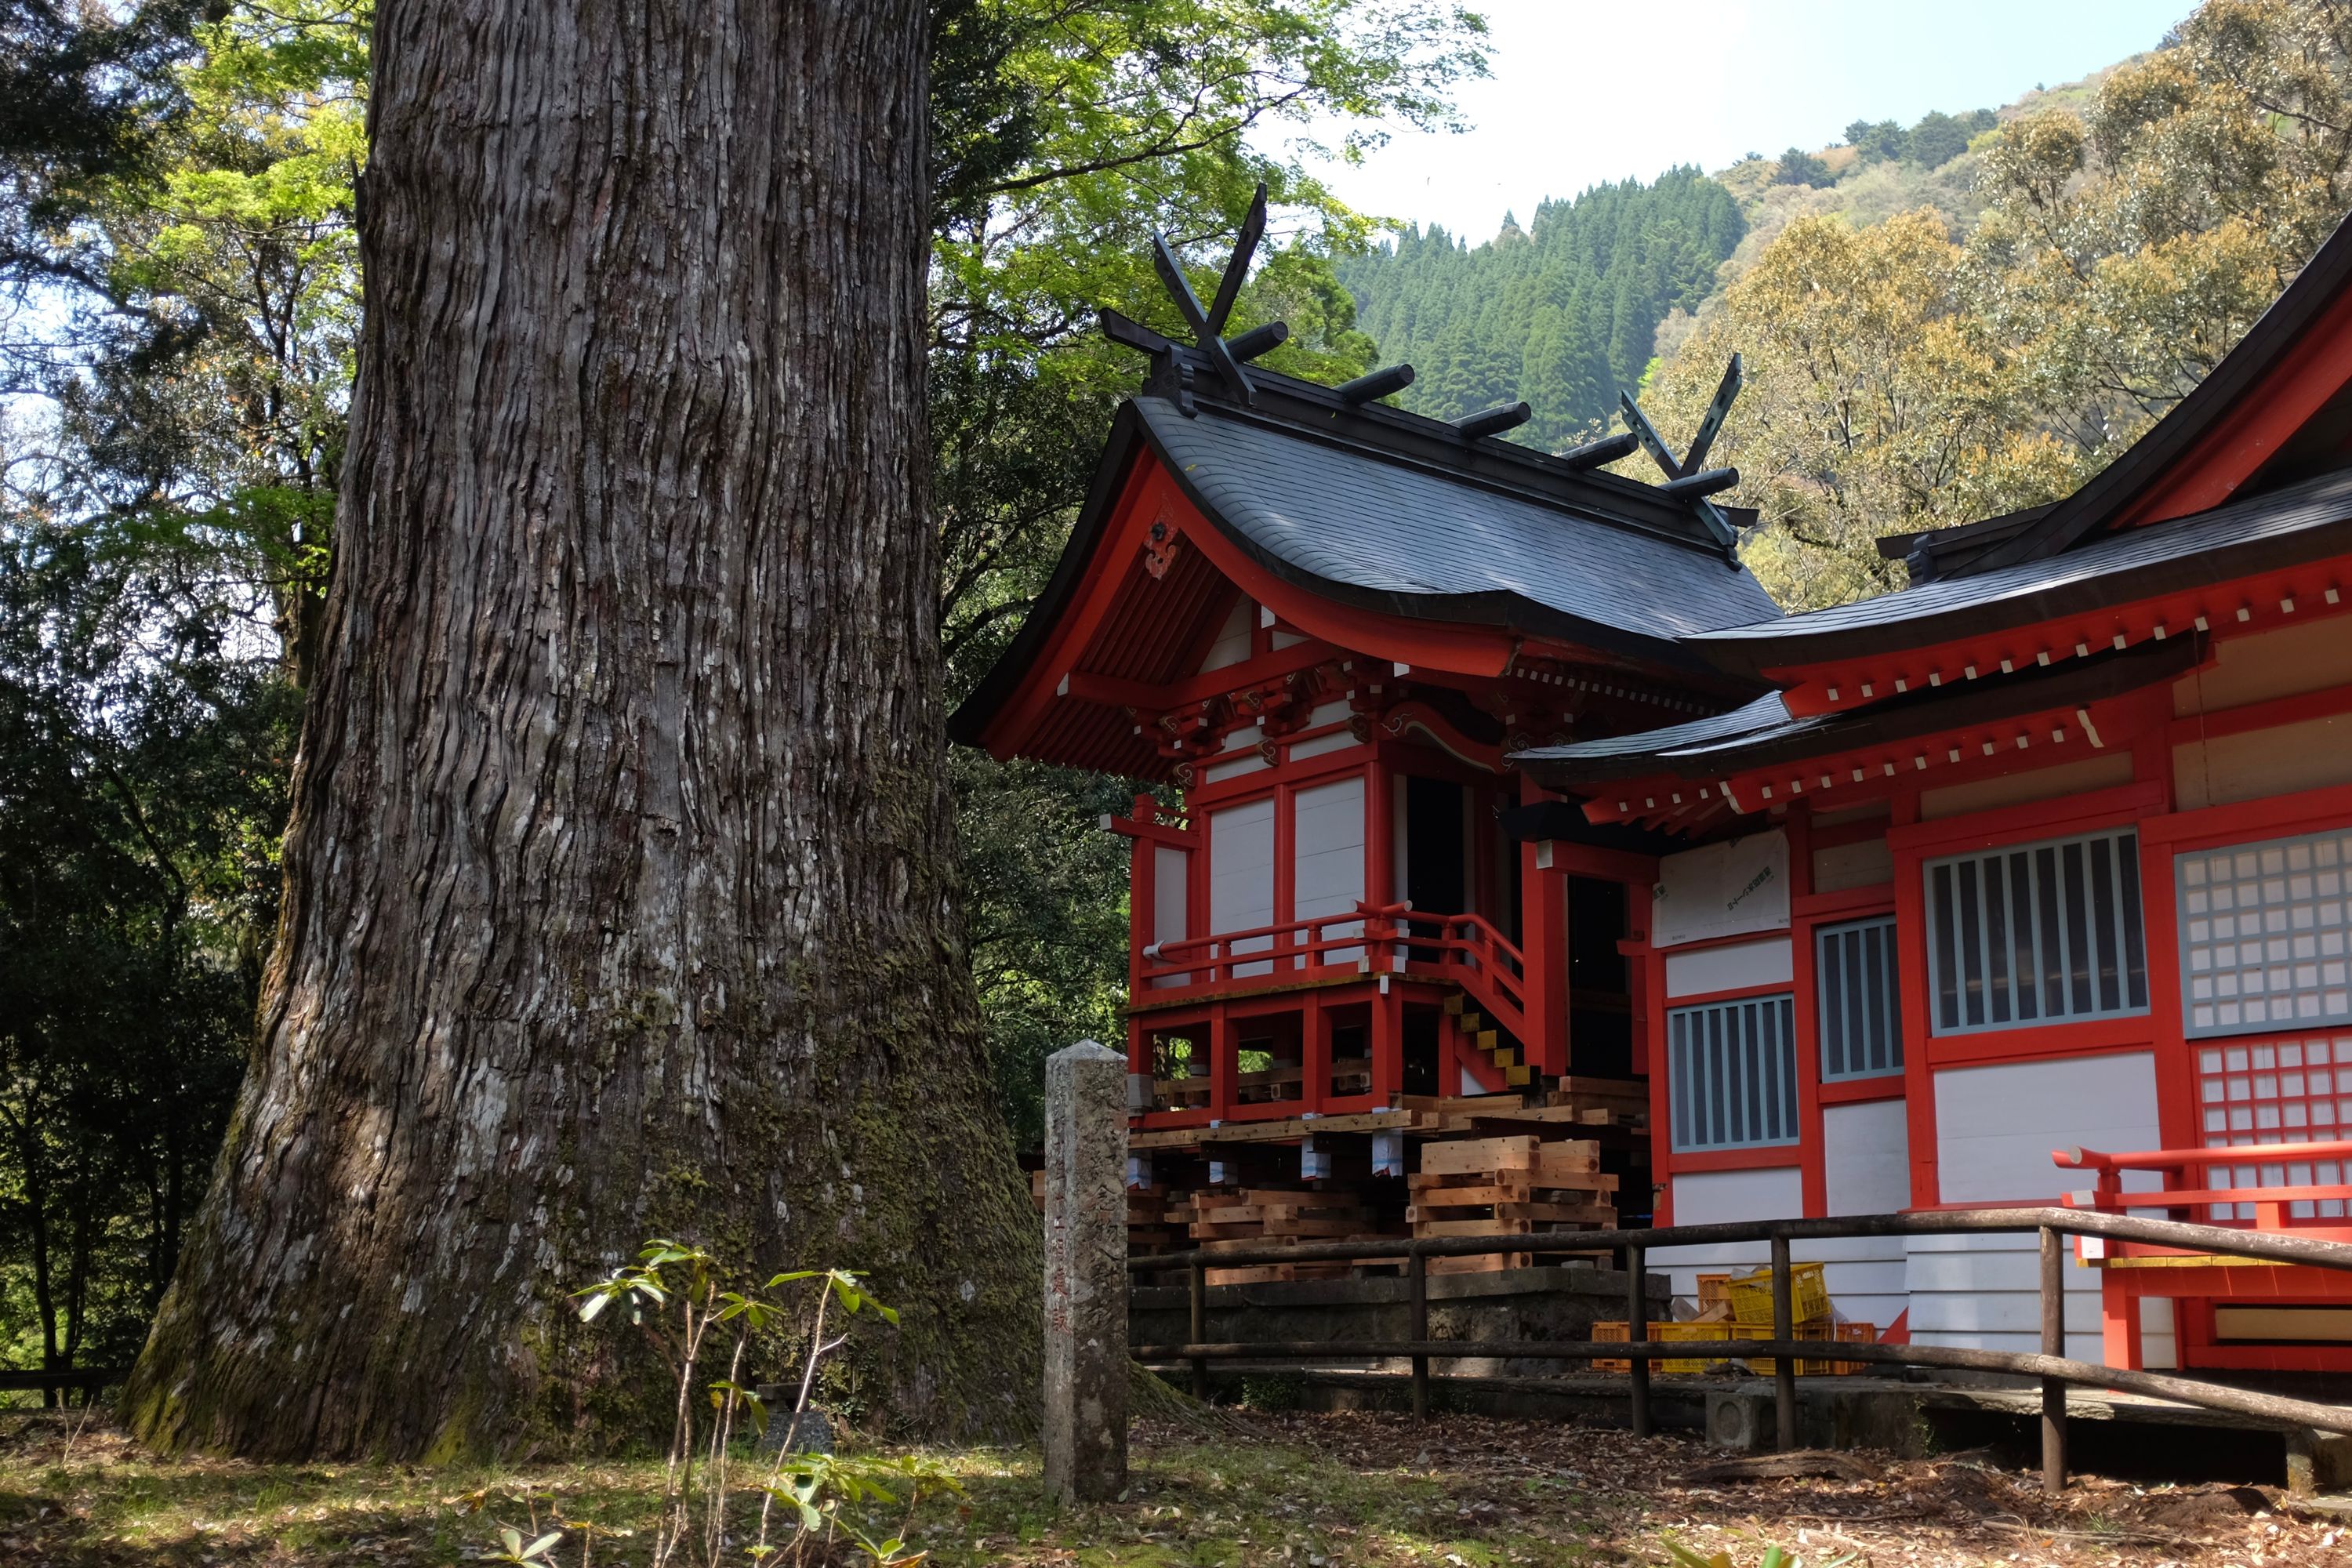 A red Shinto shrine is dwarfed by the trunk of an enormous cedar.